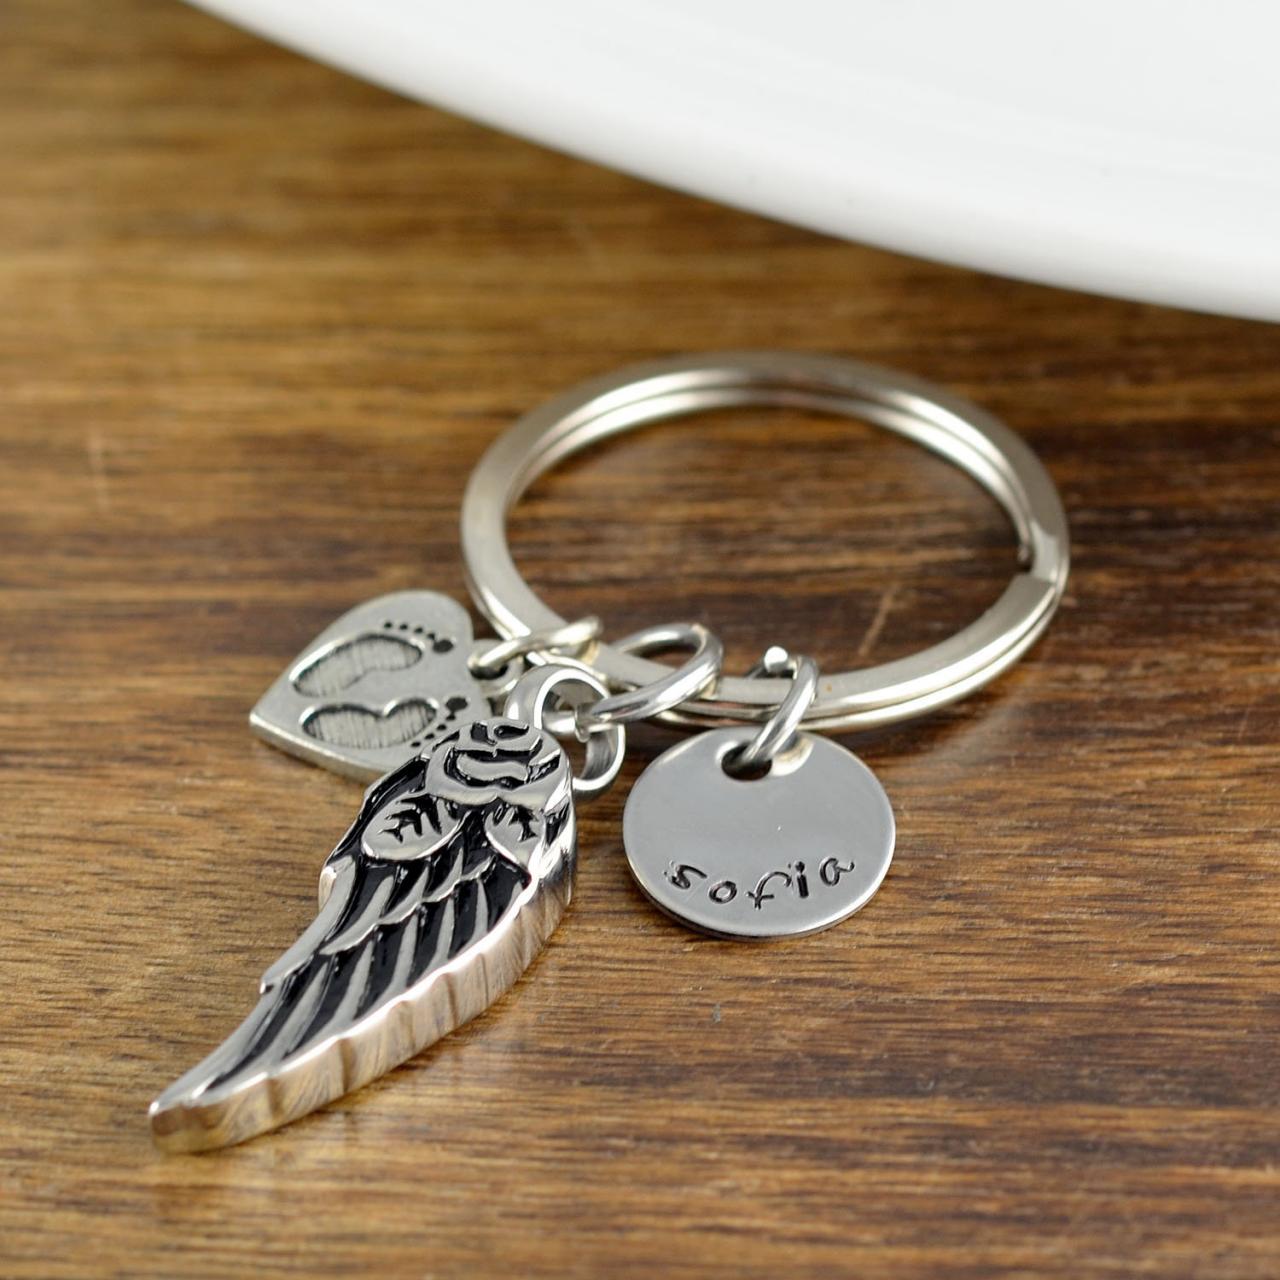 Personalized Memorial Keychain, Angel Wing Keychain, Remembrance Keychain, In Memory Of, Grief Gift, Sympathy Gift, Loss Of Baby, Child